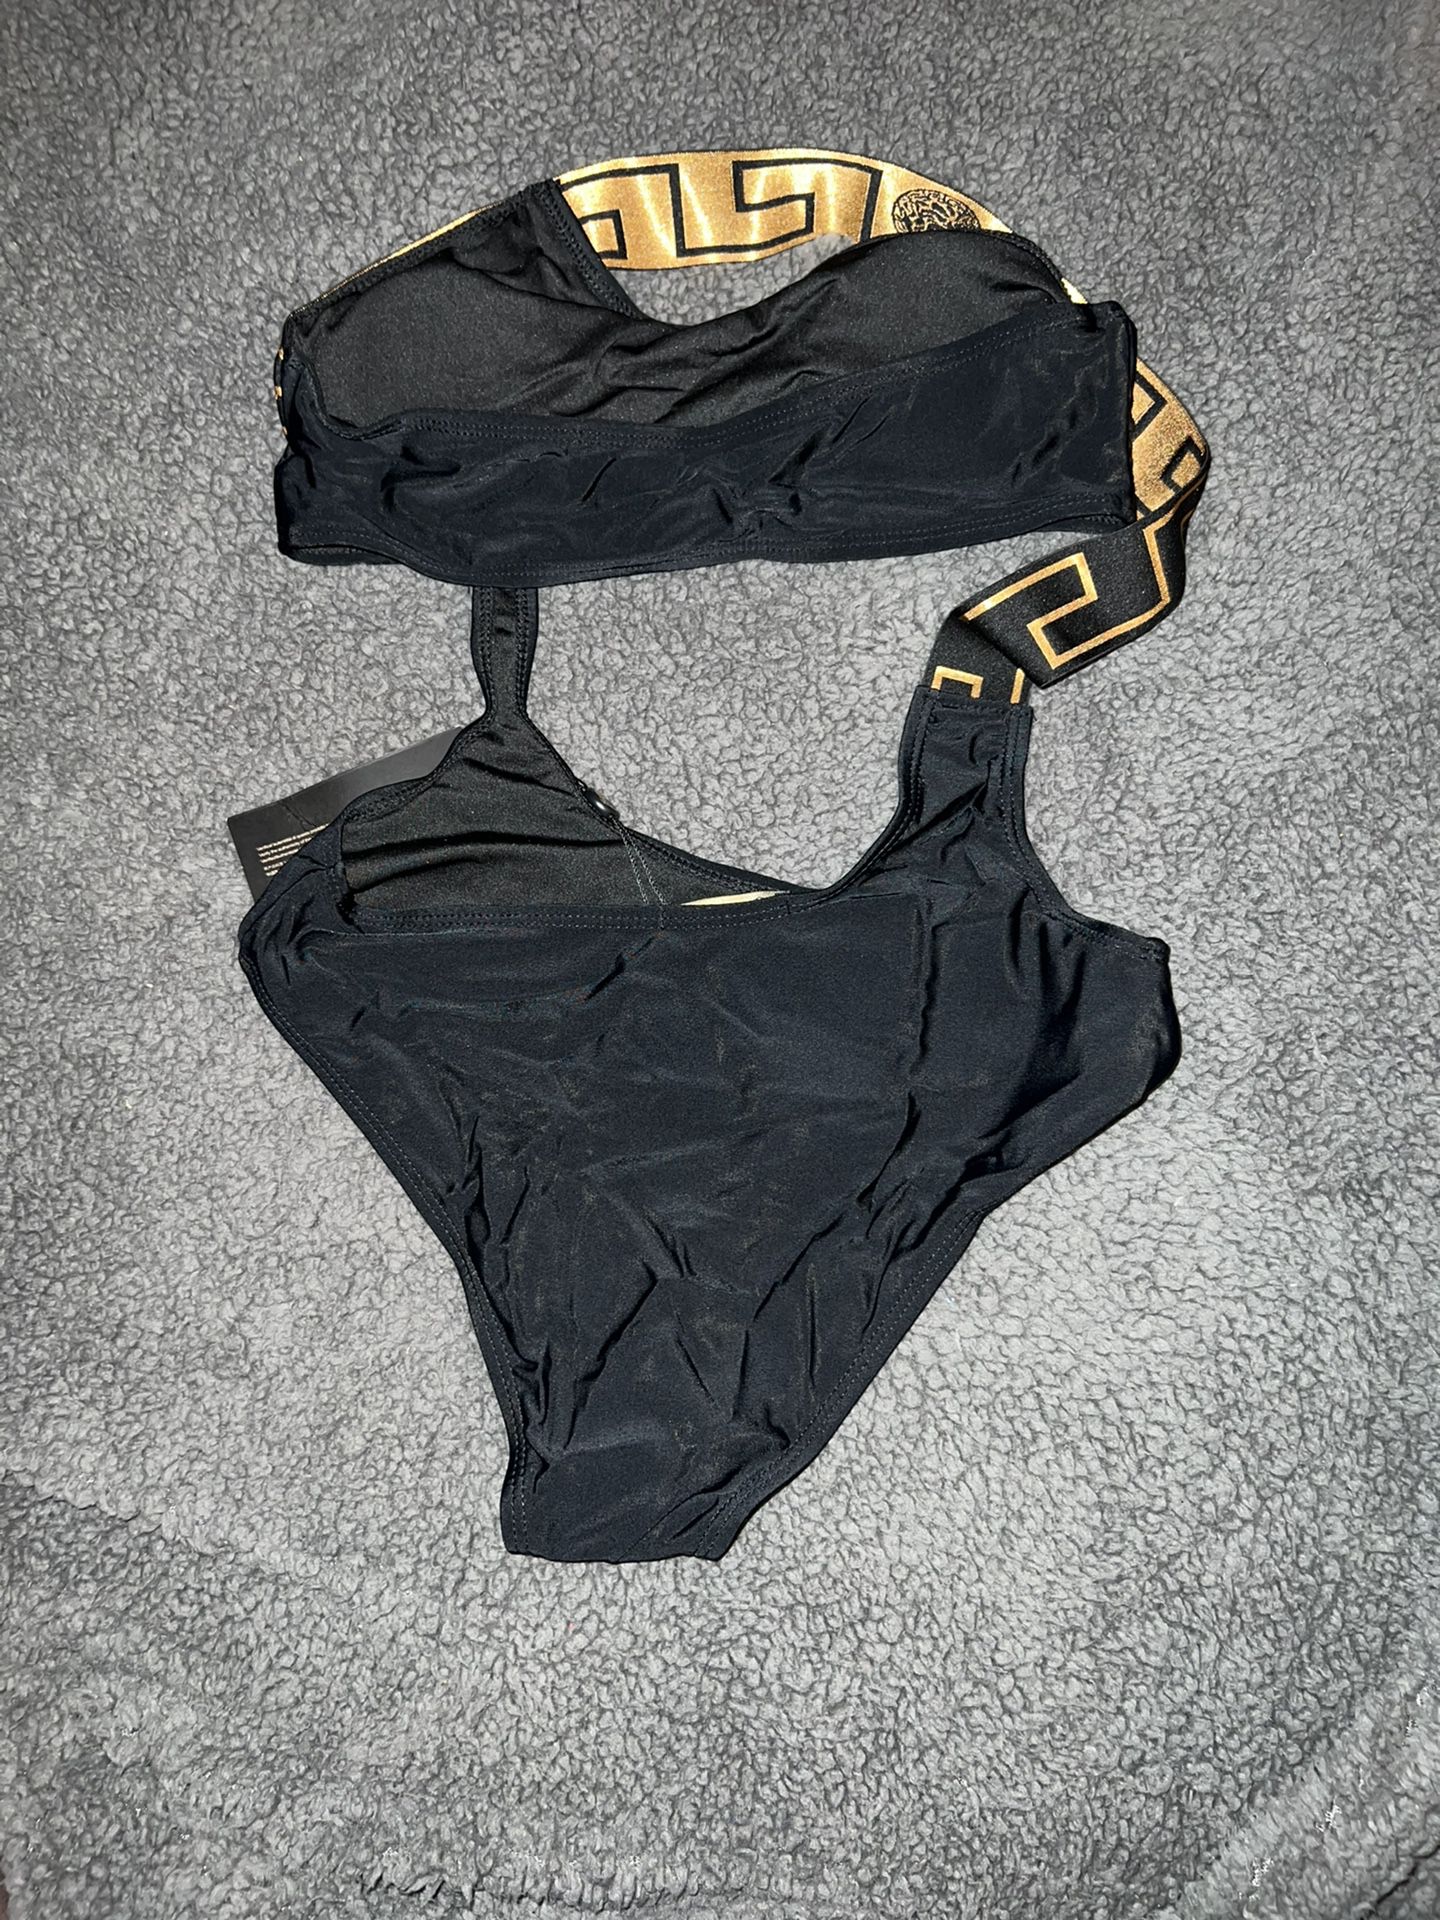 Versace Greca border swimsuit ( Womens Sizes M and L)